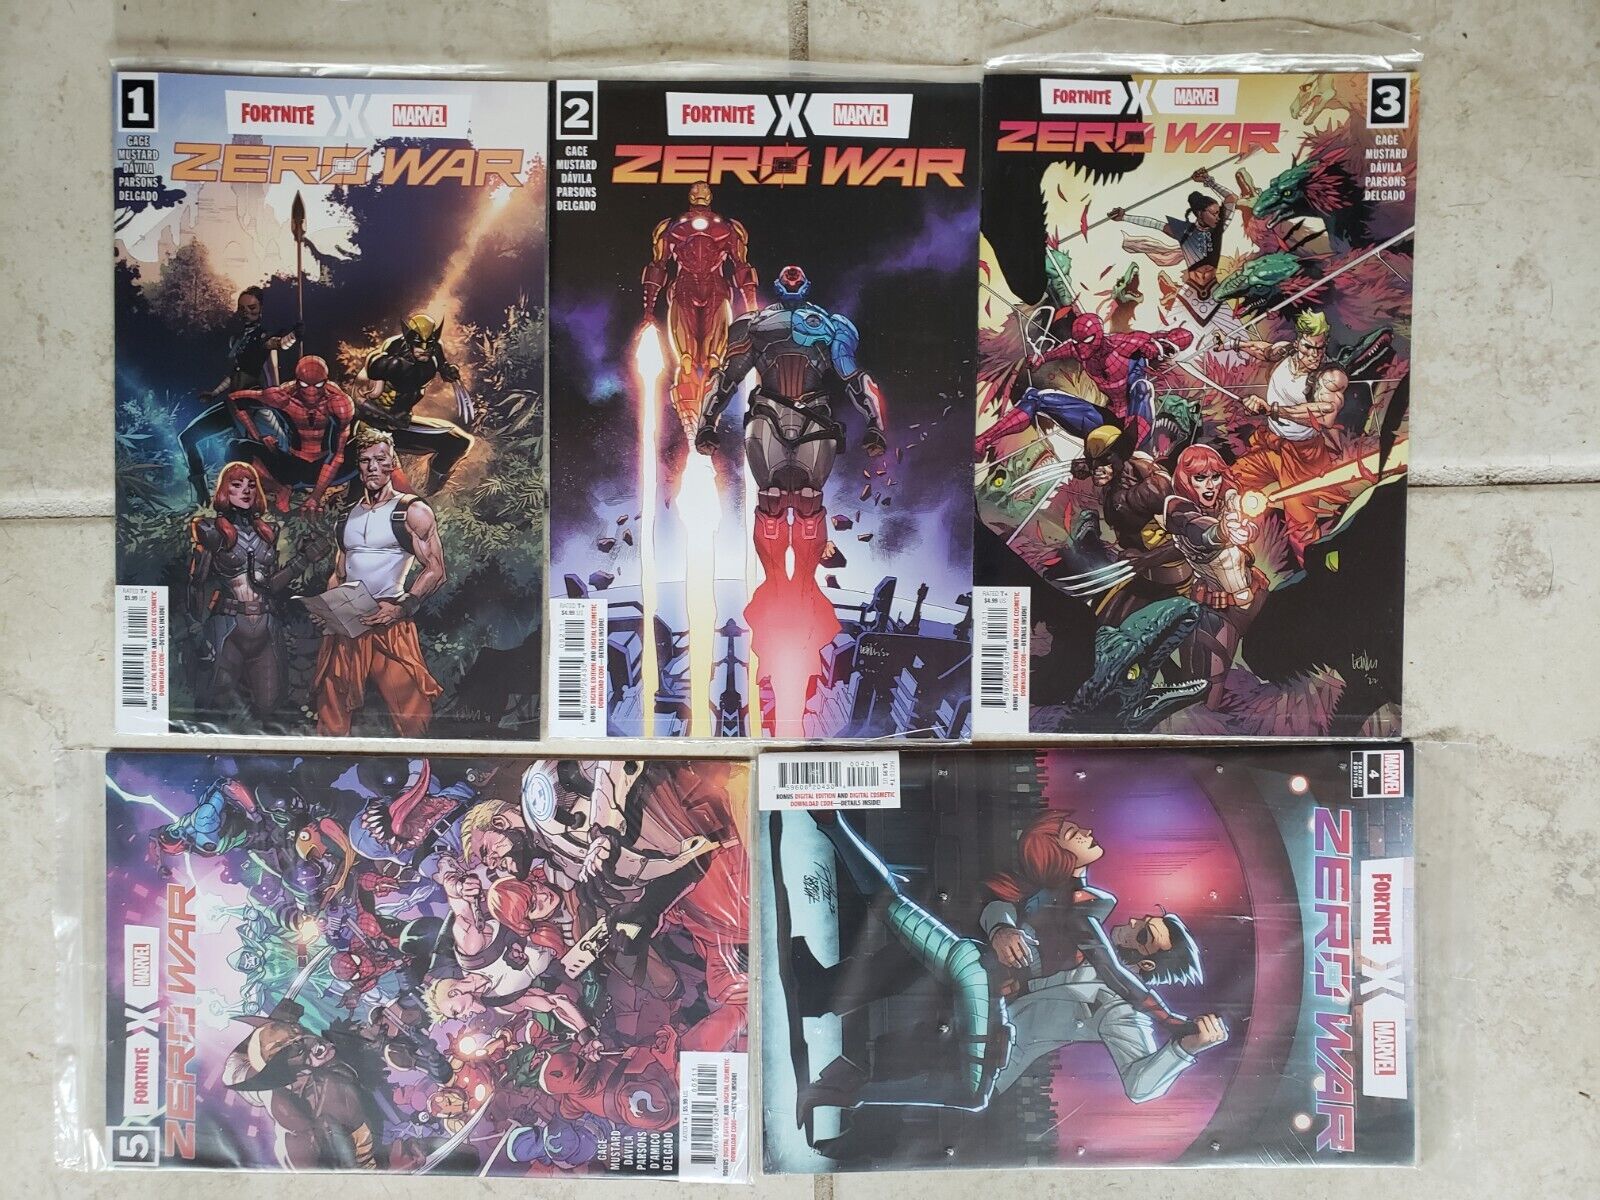 Fortnite X Marvel 1-5 Full Arc NM Still In Factory Sealed Bag With DLC CODES